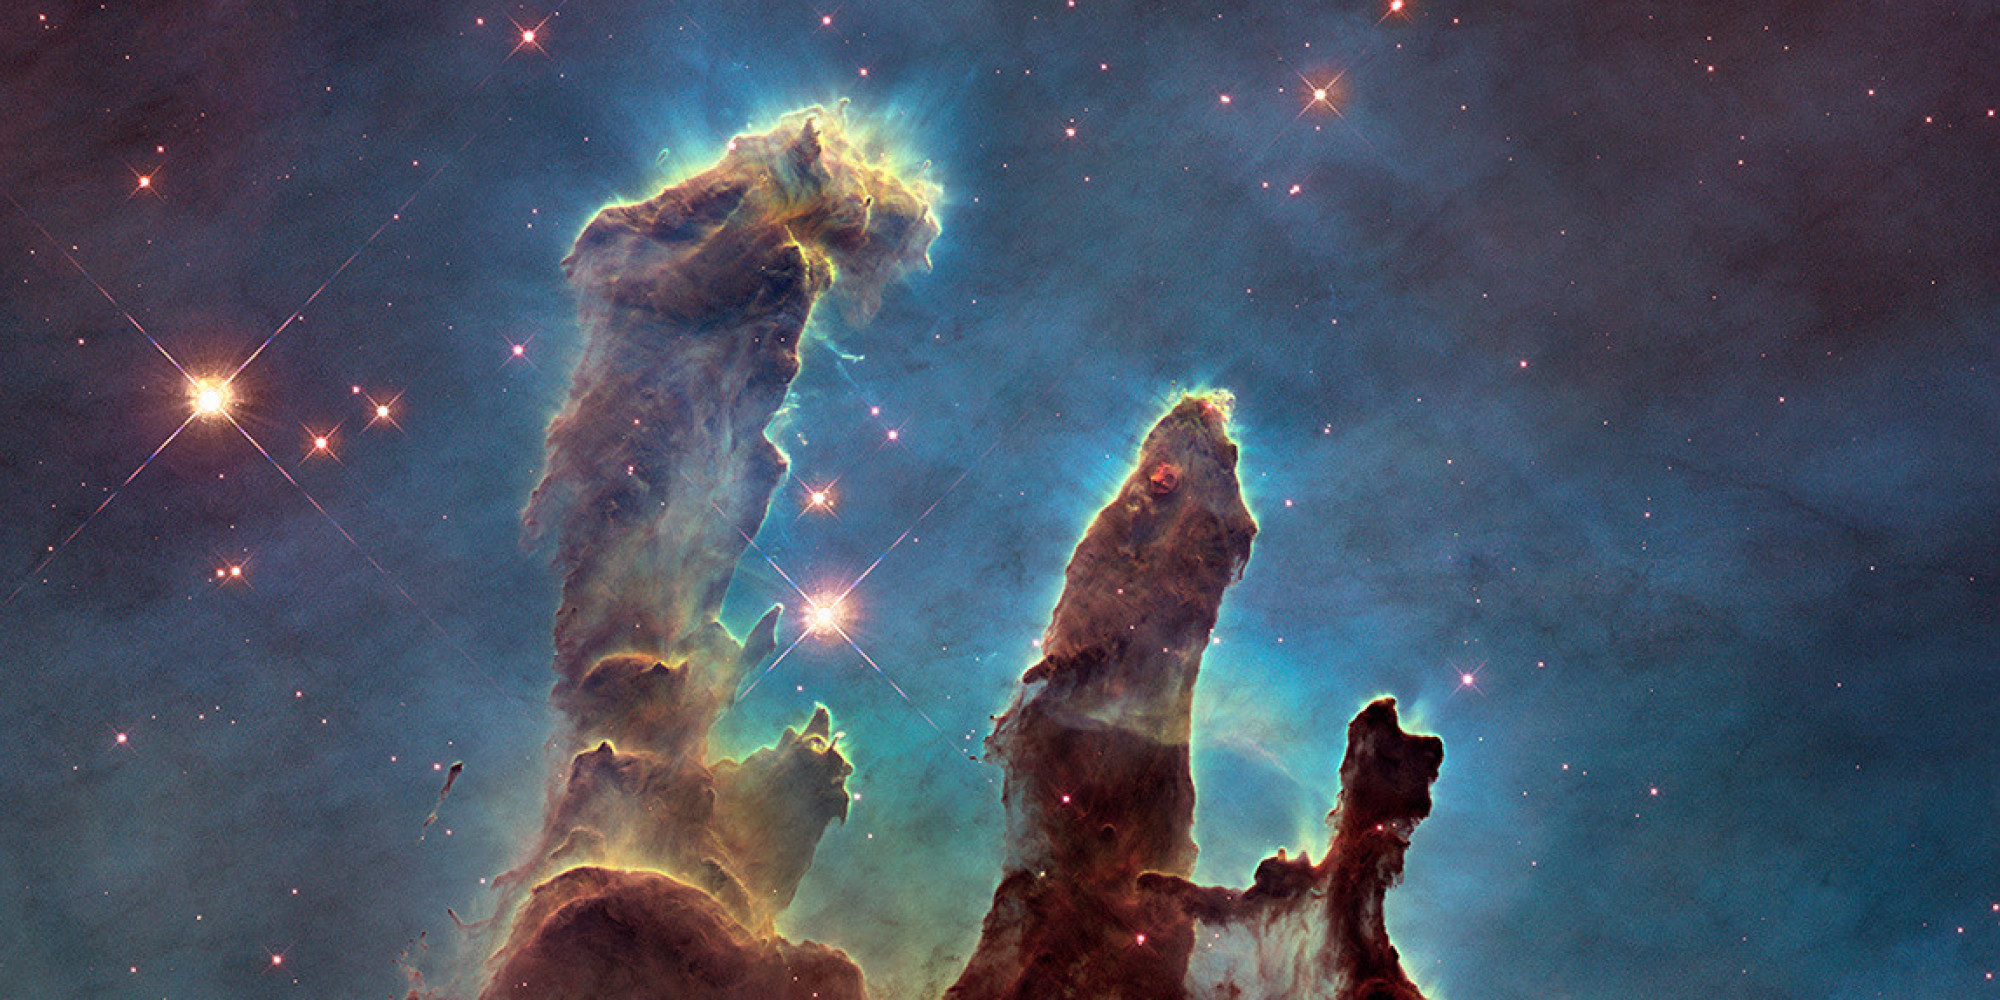 The Pillars of creation nebula. The Creator created the world but is His creation a finished work or constantly being recreated.